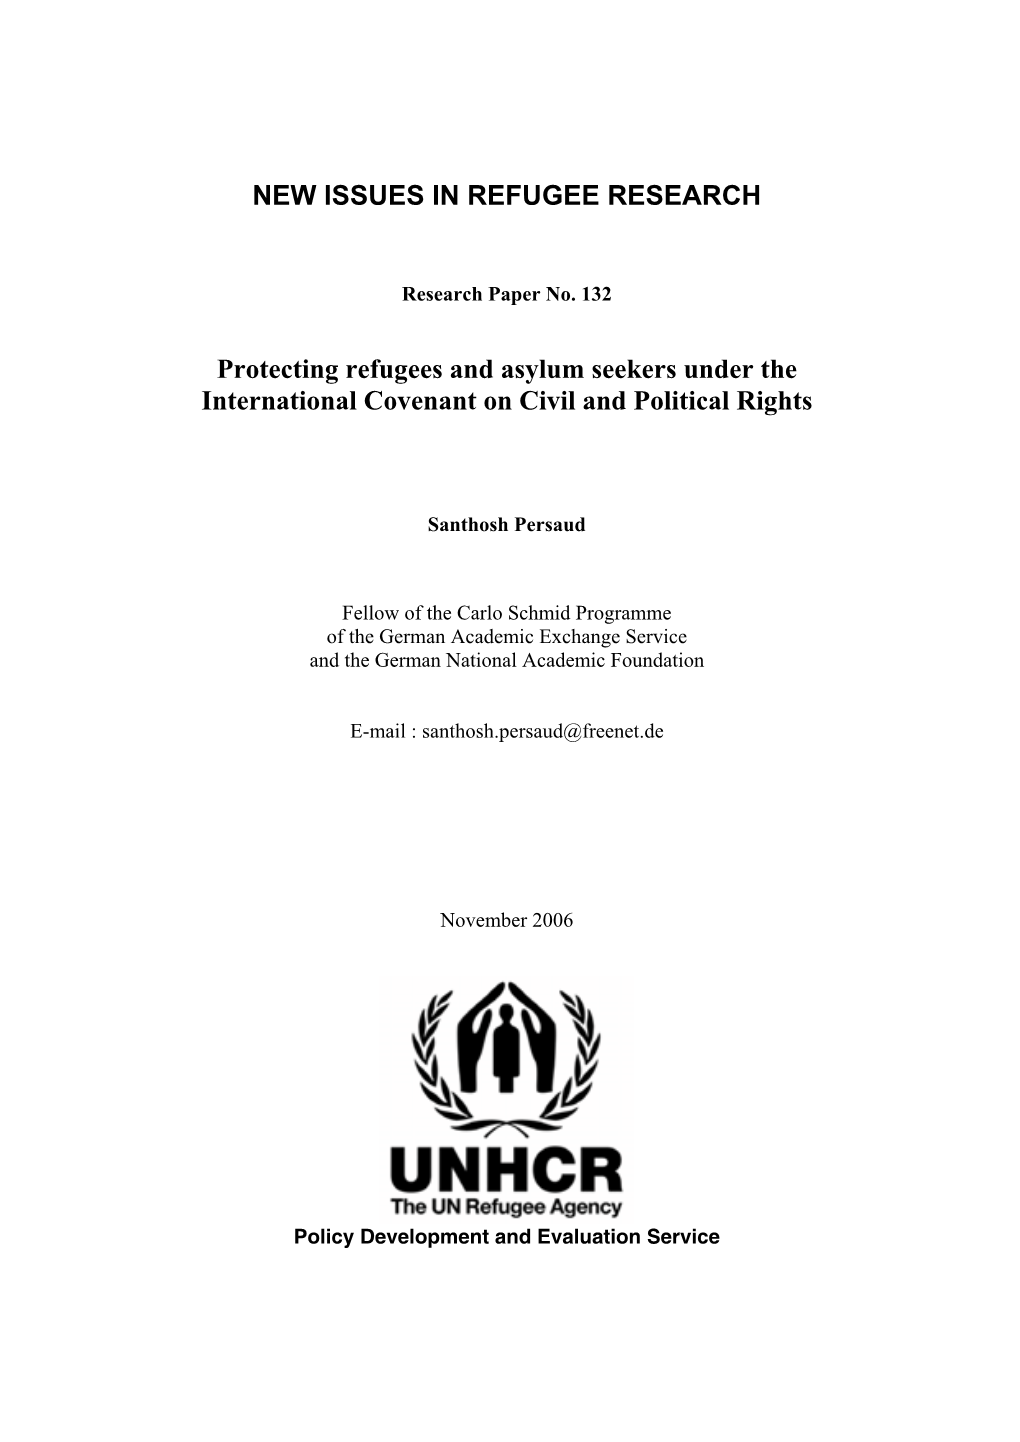 Protecting Refugees and Asylum Seekers Under the International Covenant on Civil and Political Rights